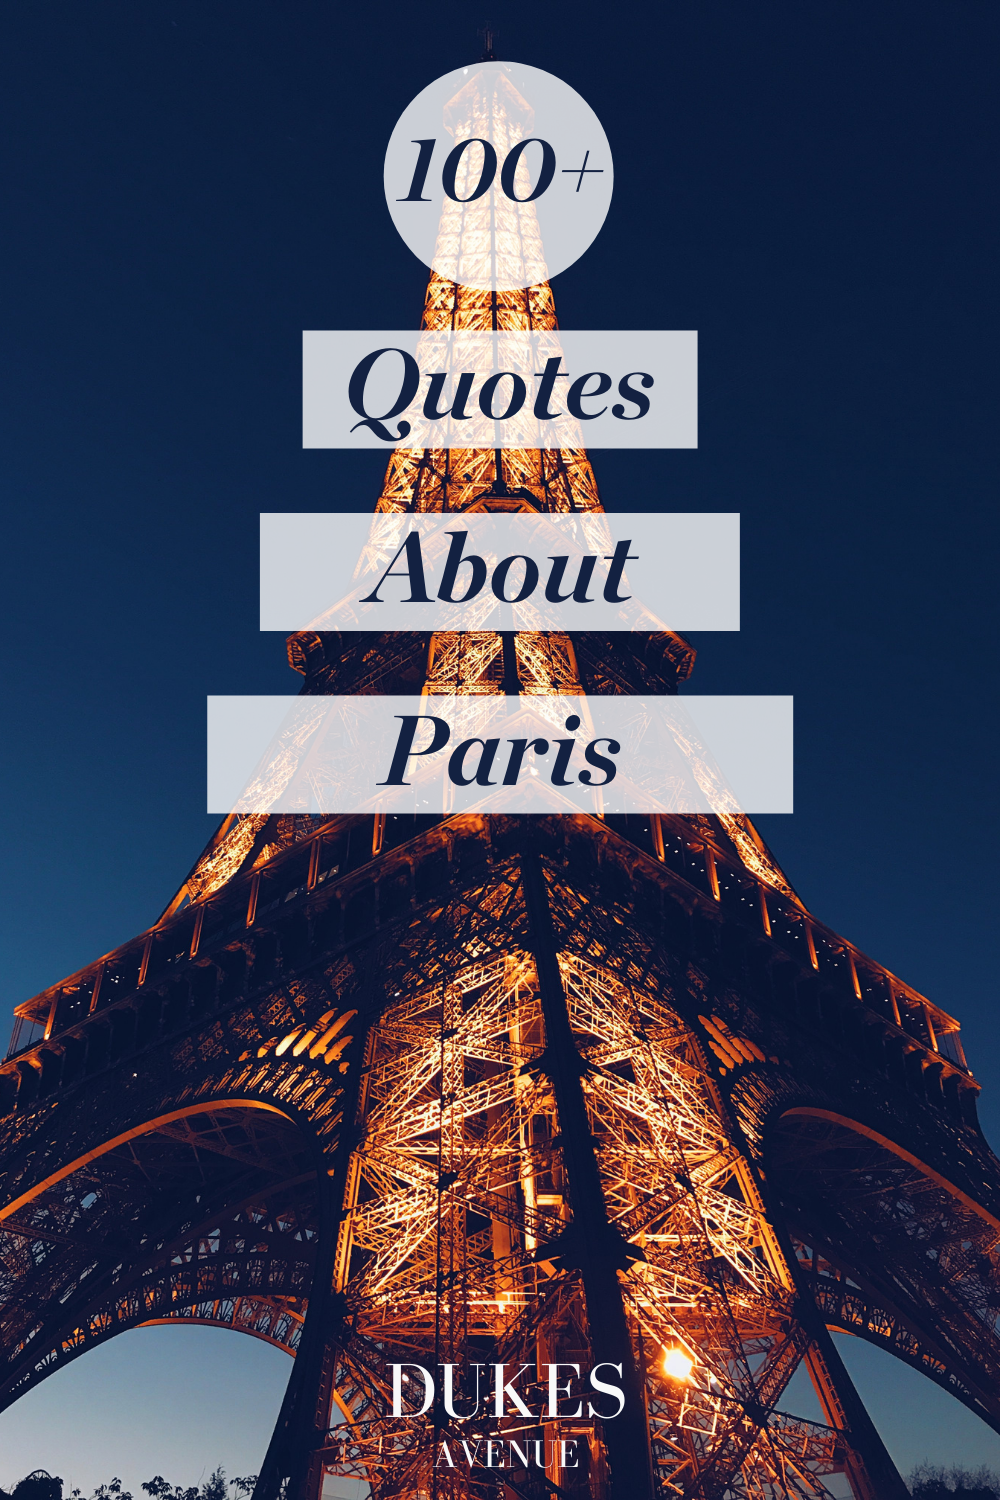 Close Up Shot of the Eiffel Tower at Night with text overlay '100+ quotes about Paris'